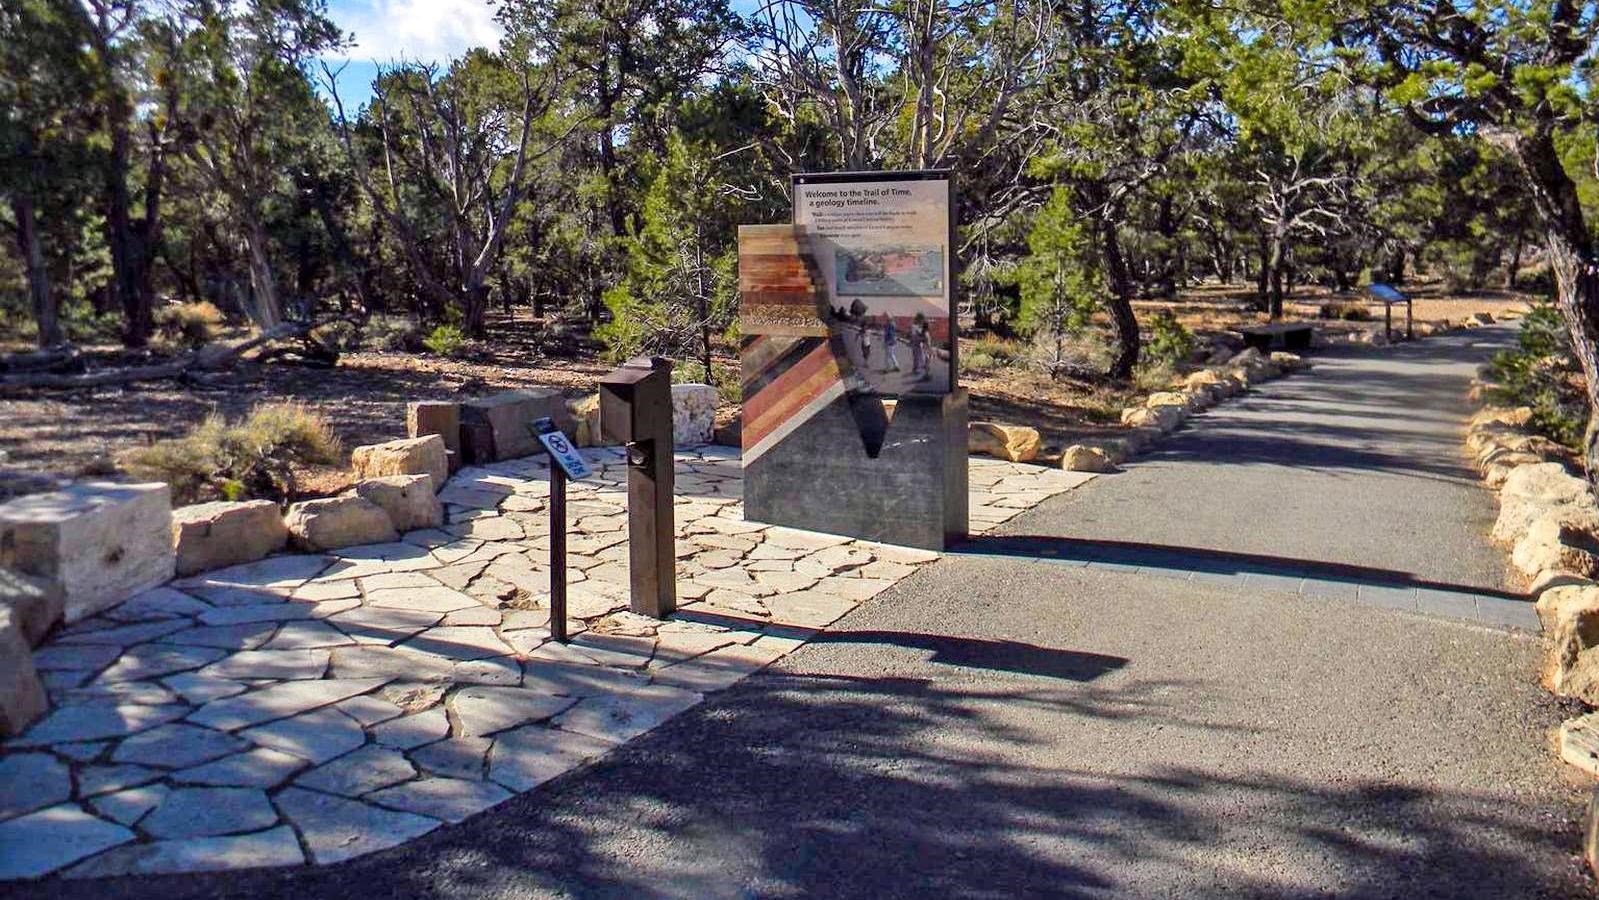 Along a paved footpath, flagstone slabs and a stone monolith mark the start of a geologic timeline,